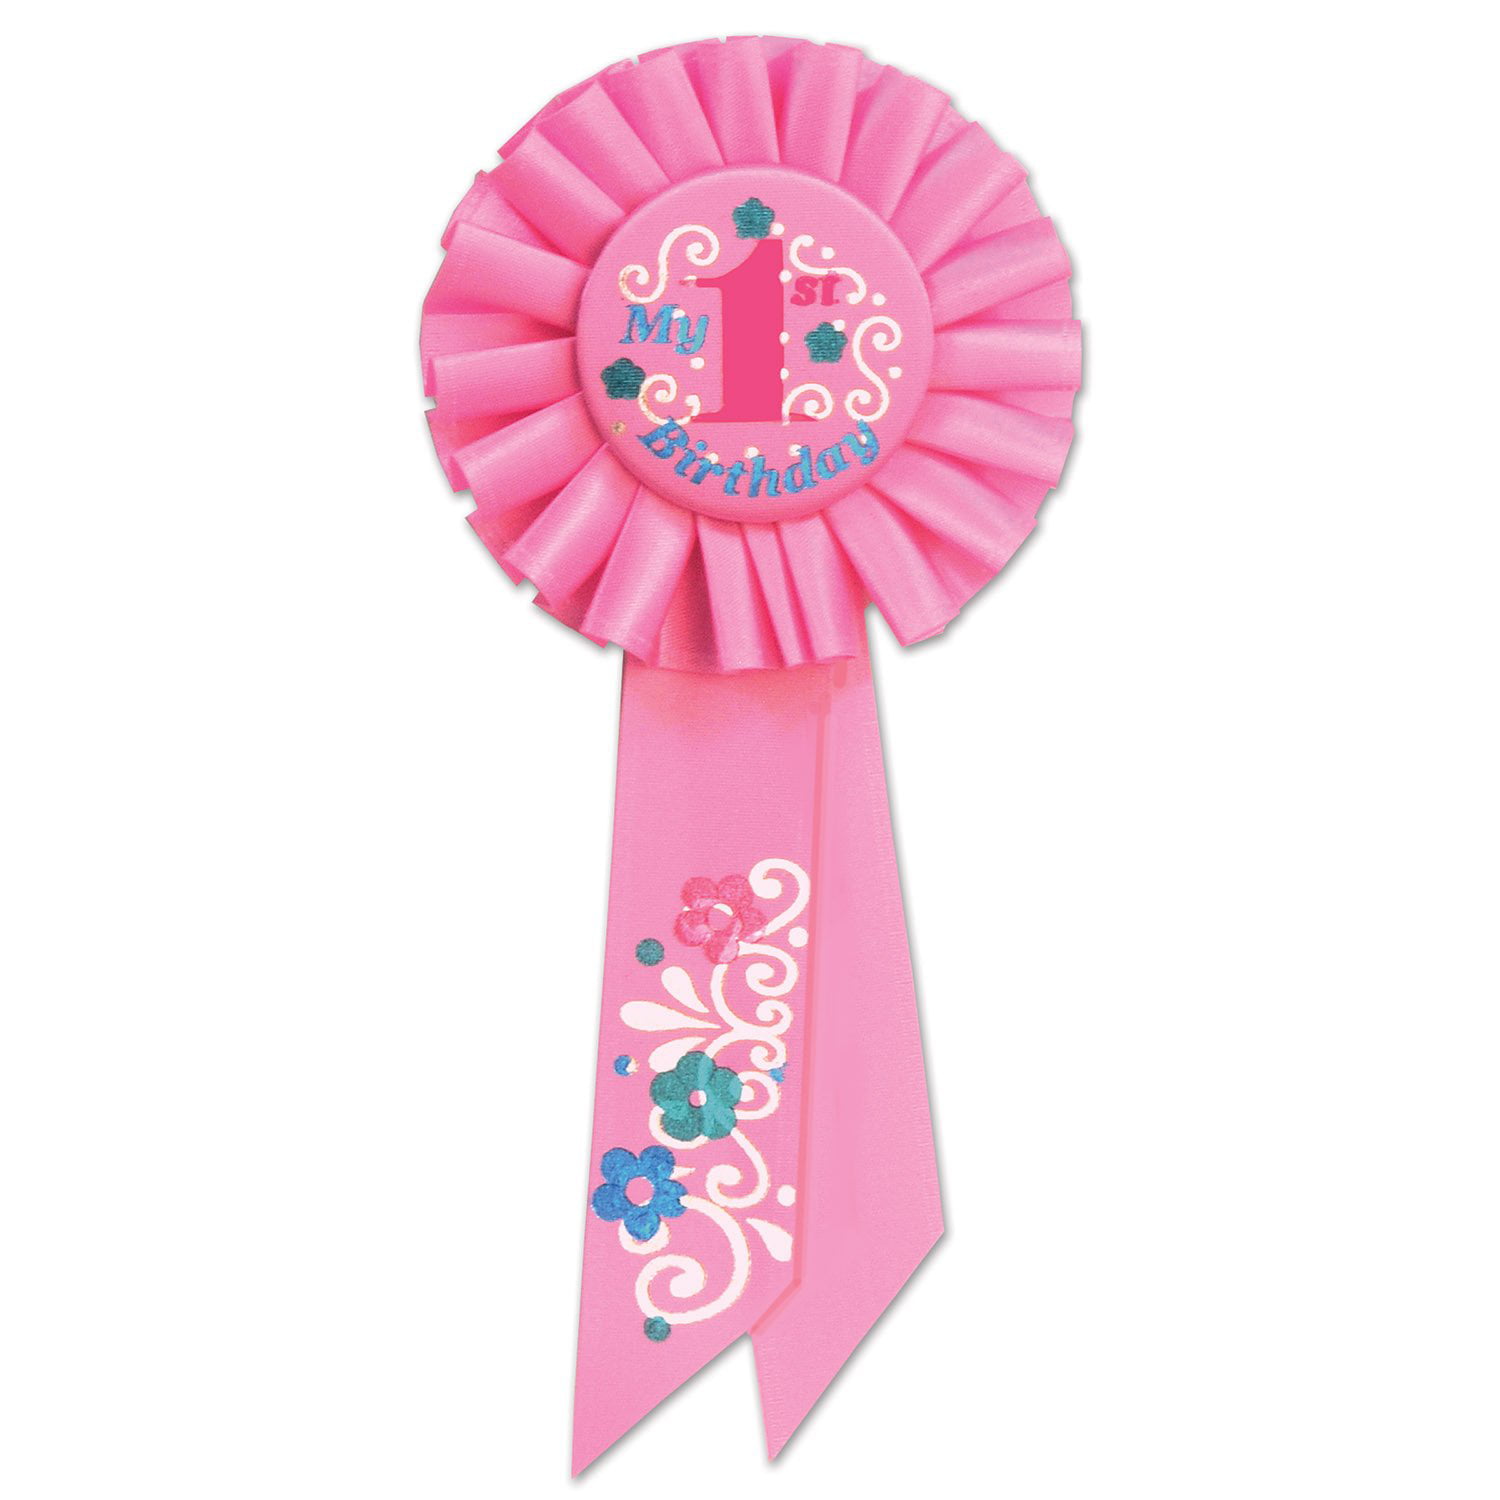 Happy "Birthday Girl" Award Badge Ribbon Pin Hot Pink with Flowers Party Acc. 